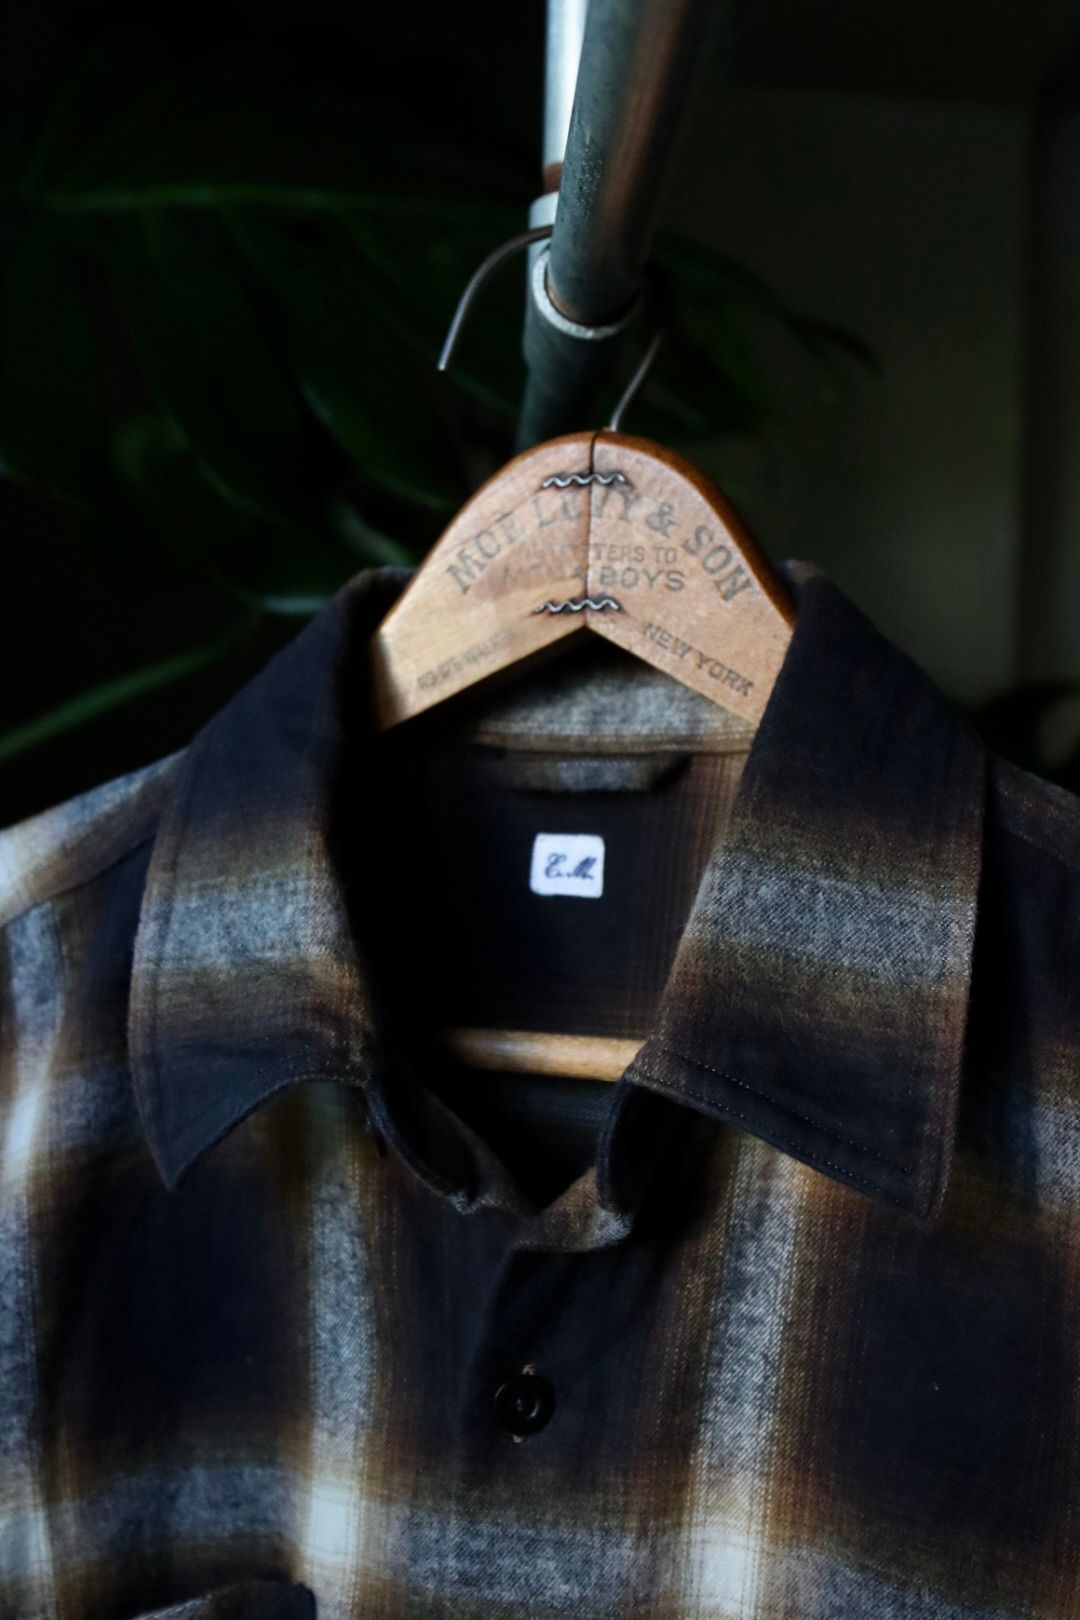 Ets.MATERIAUX - ETS.MATERIAUX / マテリオ22AW Ombre Check Flannel